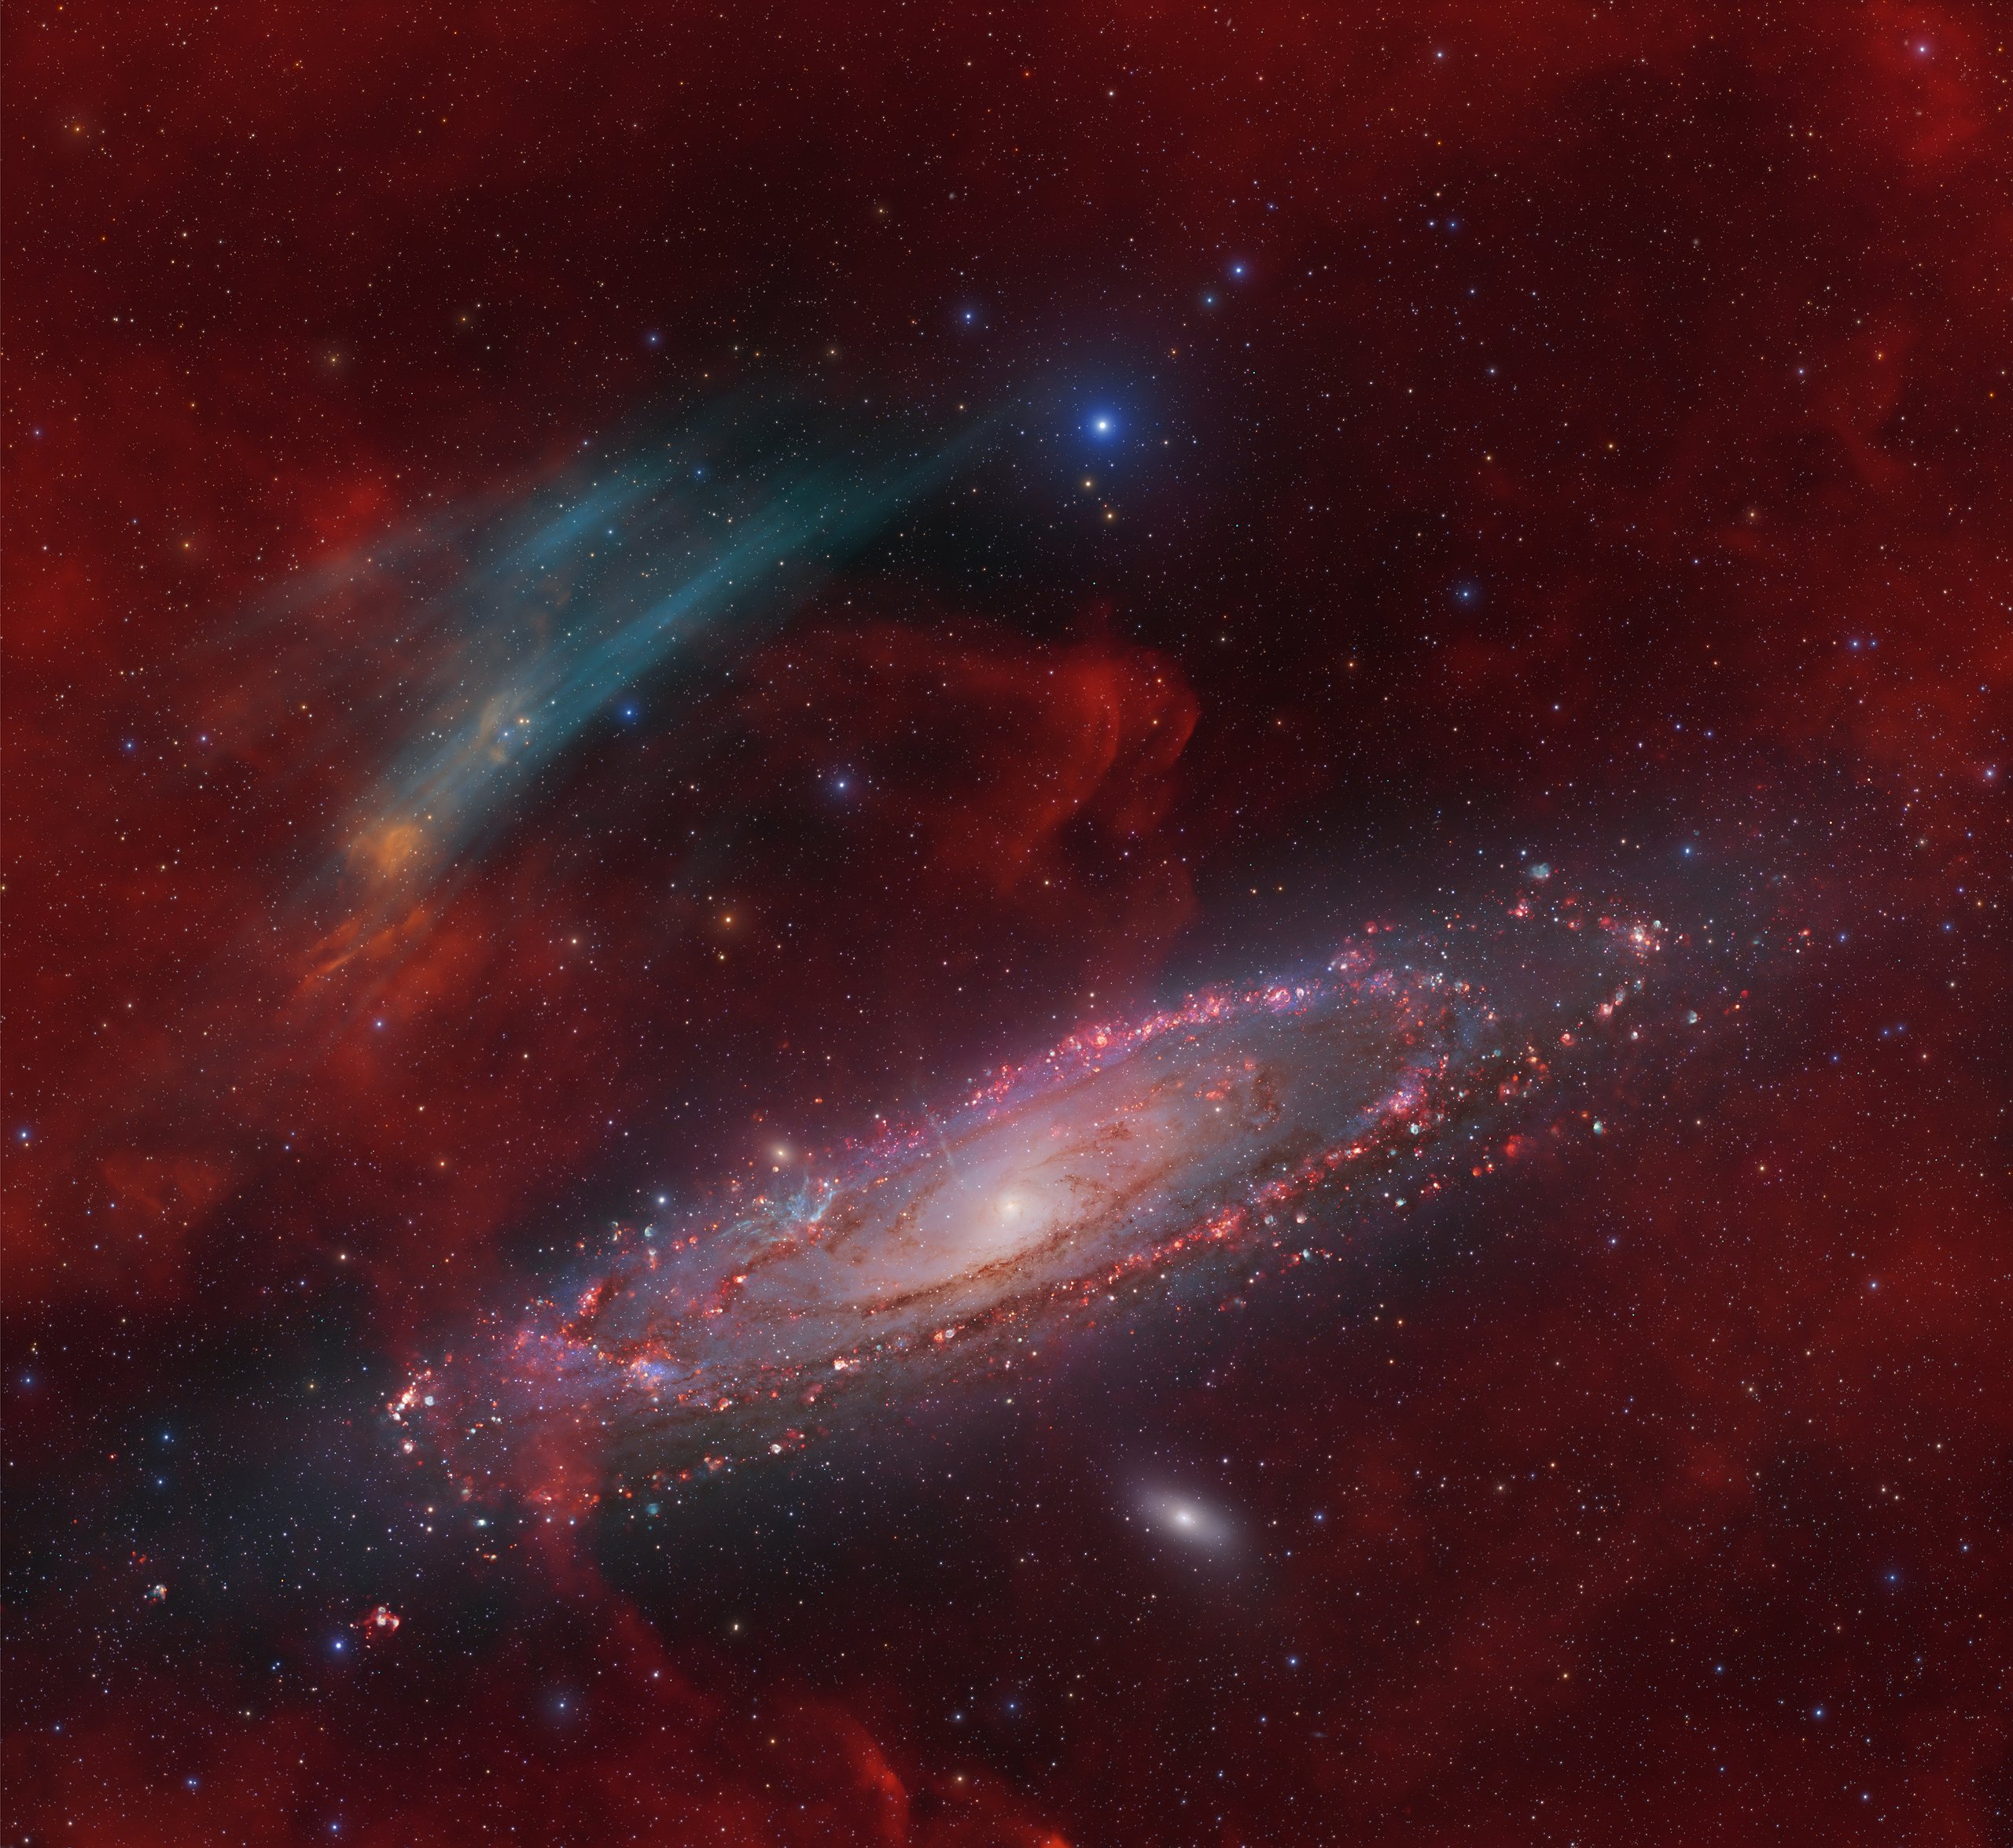 New discovery! An arc-shaped structure adjacent to the Andromeda Galaxy